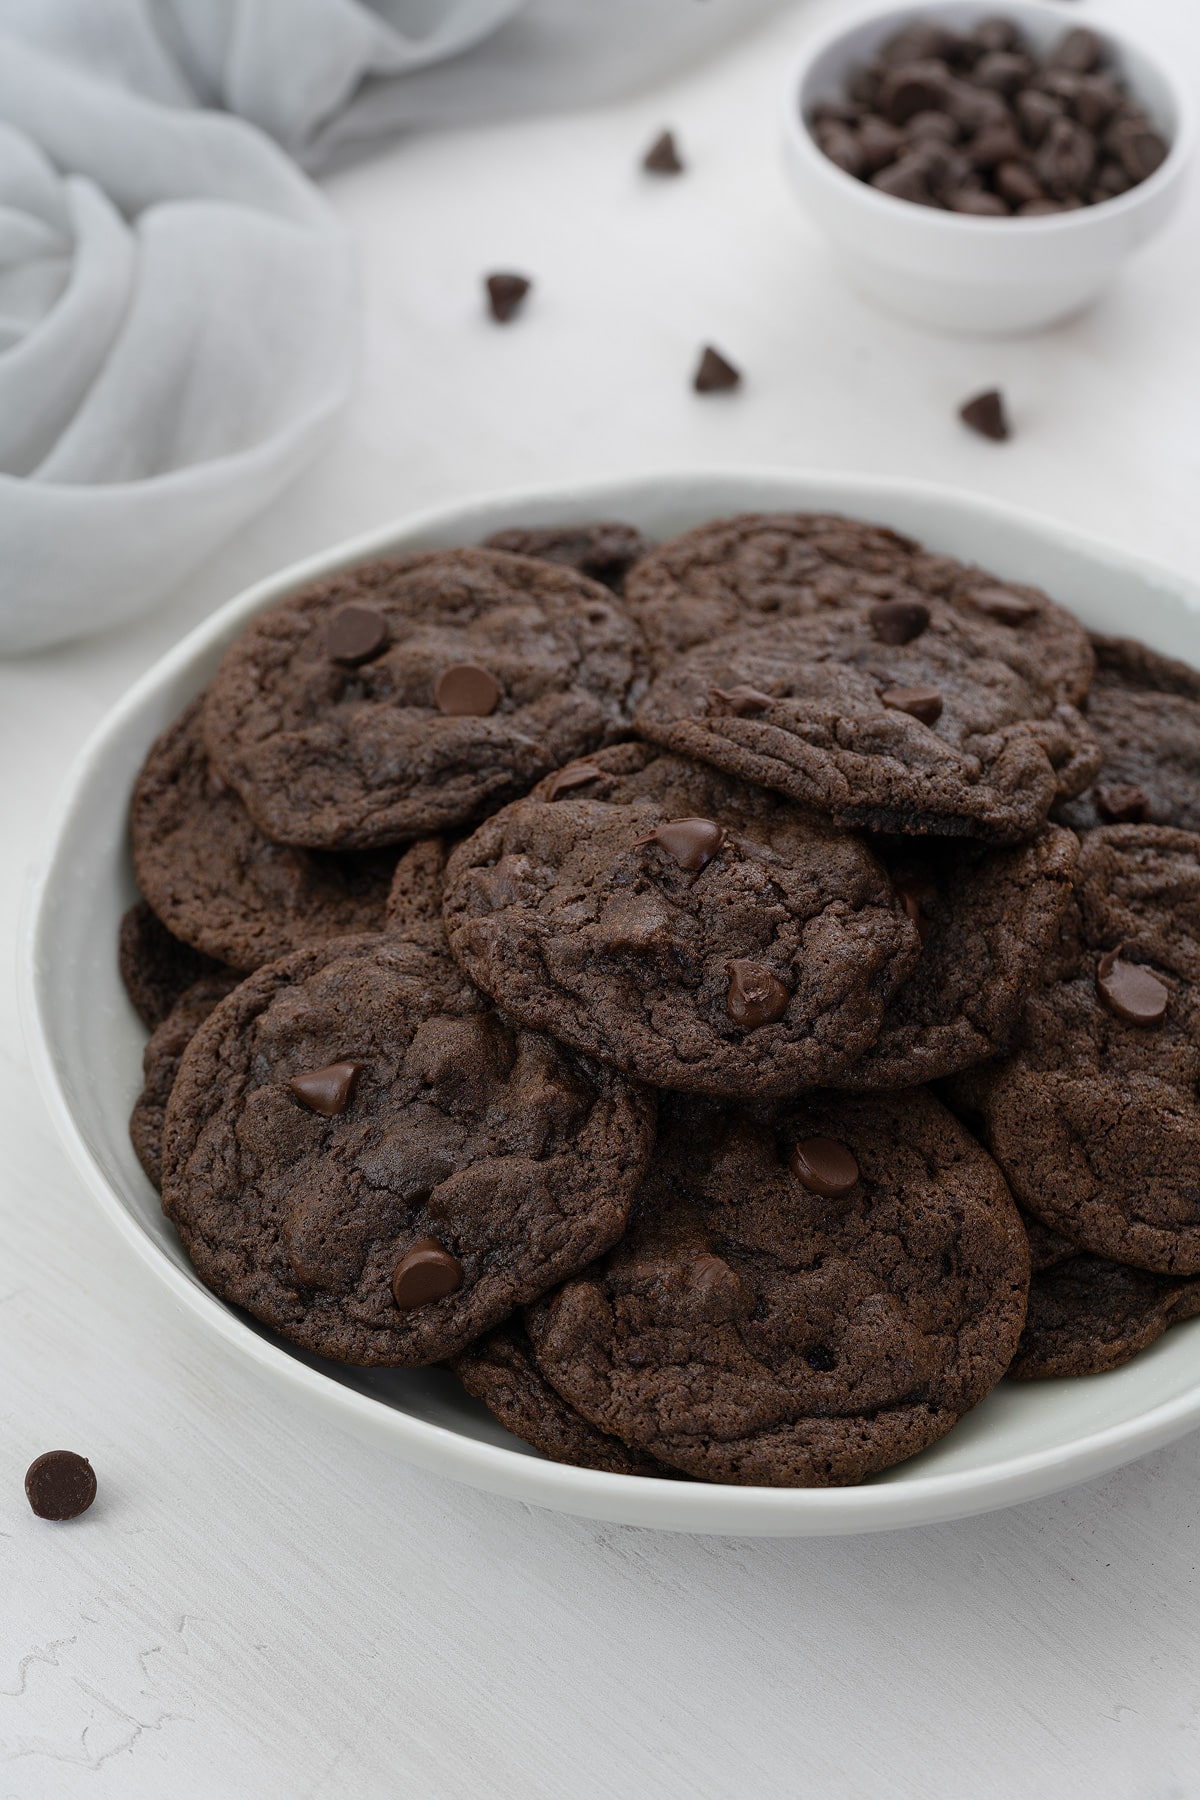 Delicious homemade double chocolate chip cookies displayed on a plate, accompanied by a cup filled with extra chocolate chips and a neatly arranged towel in the background.